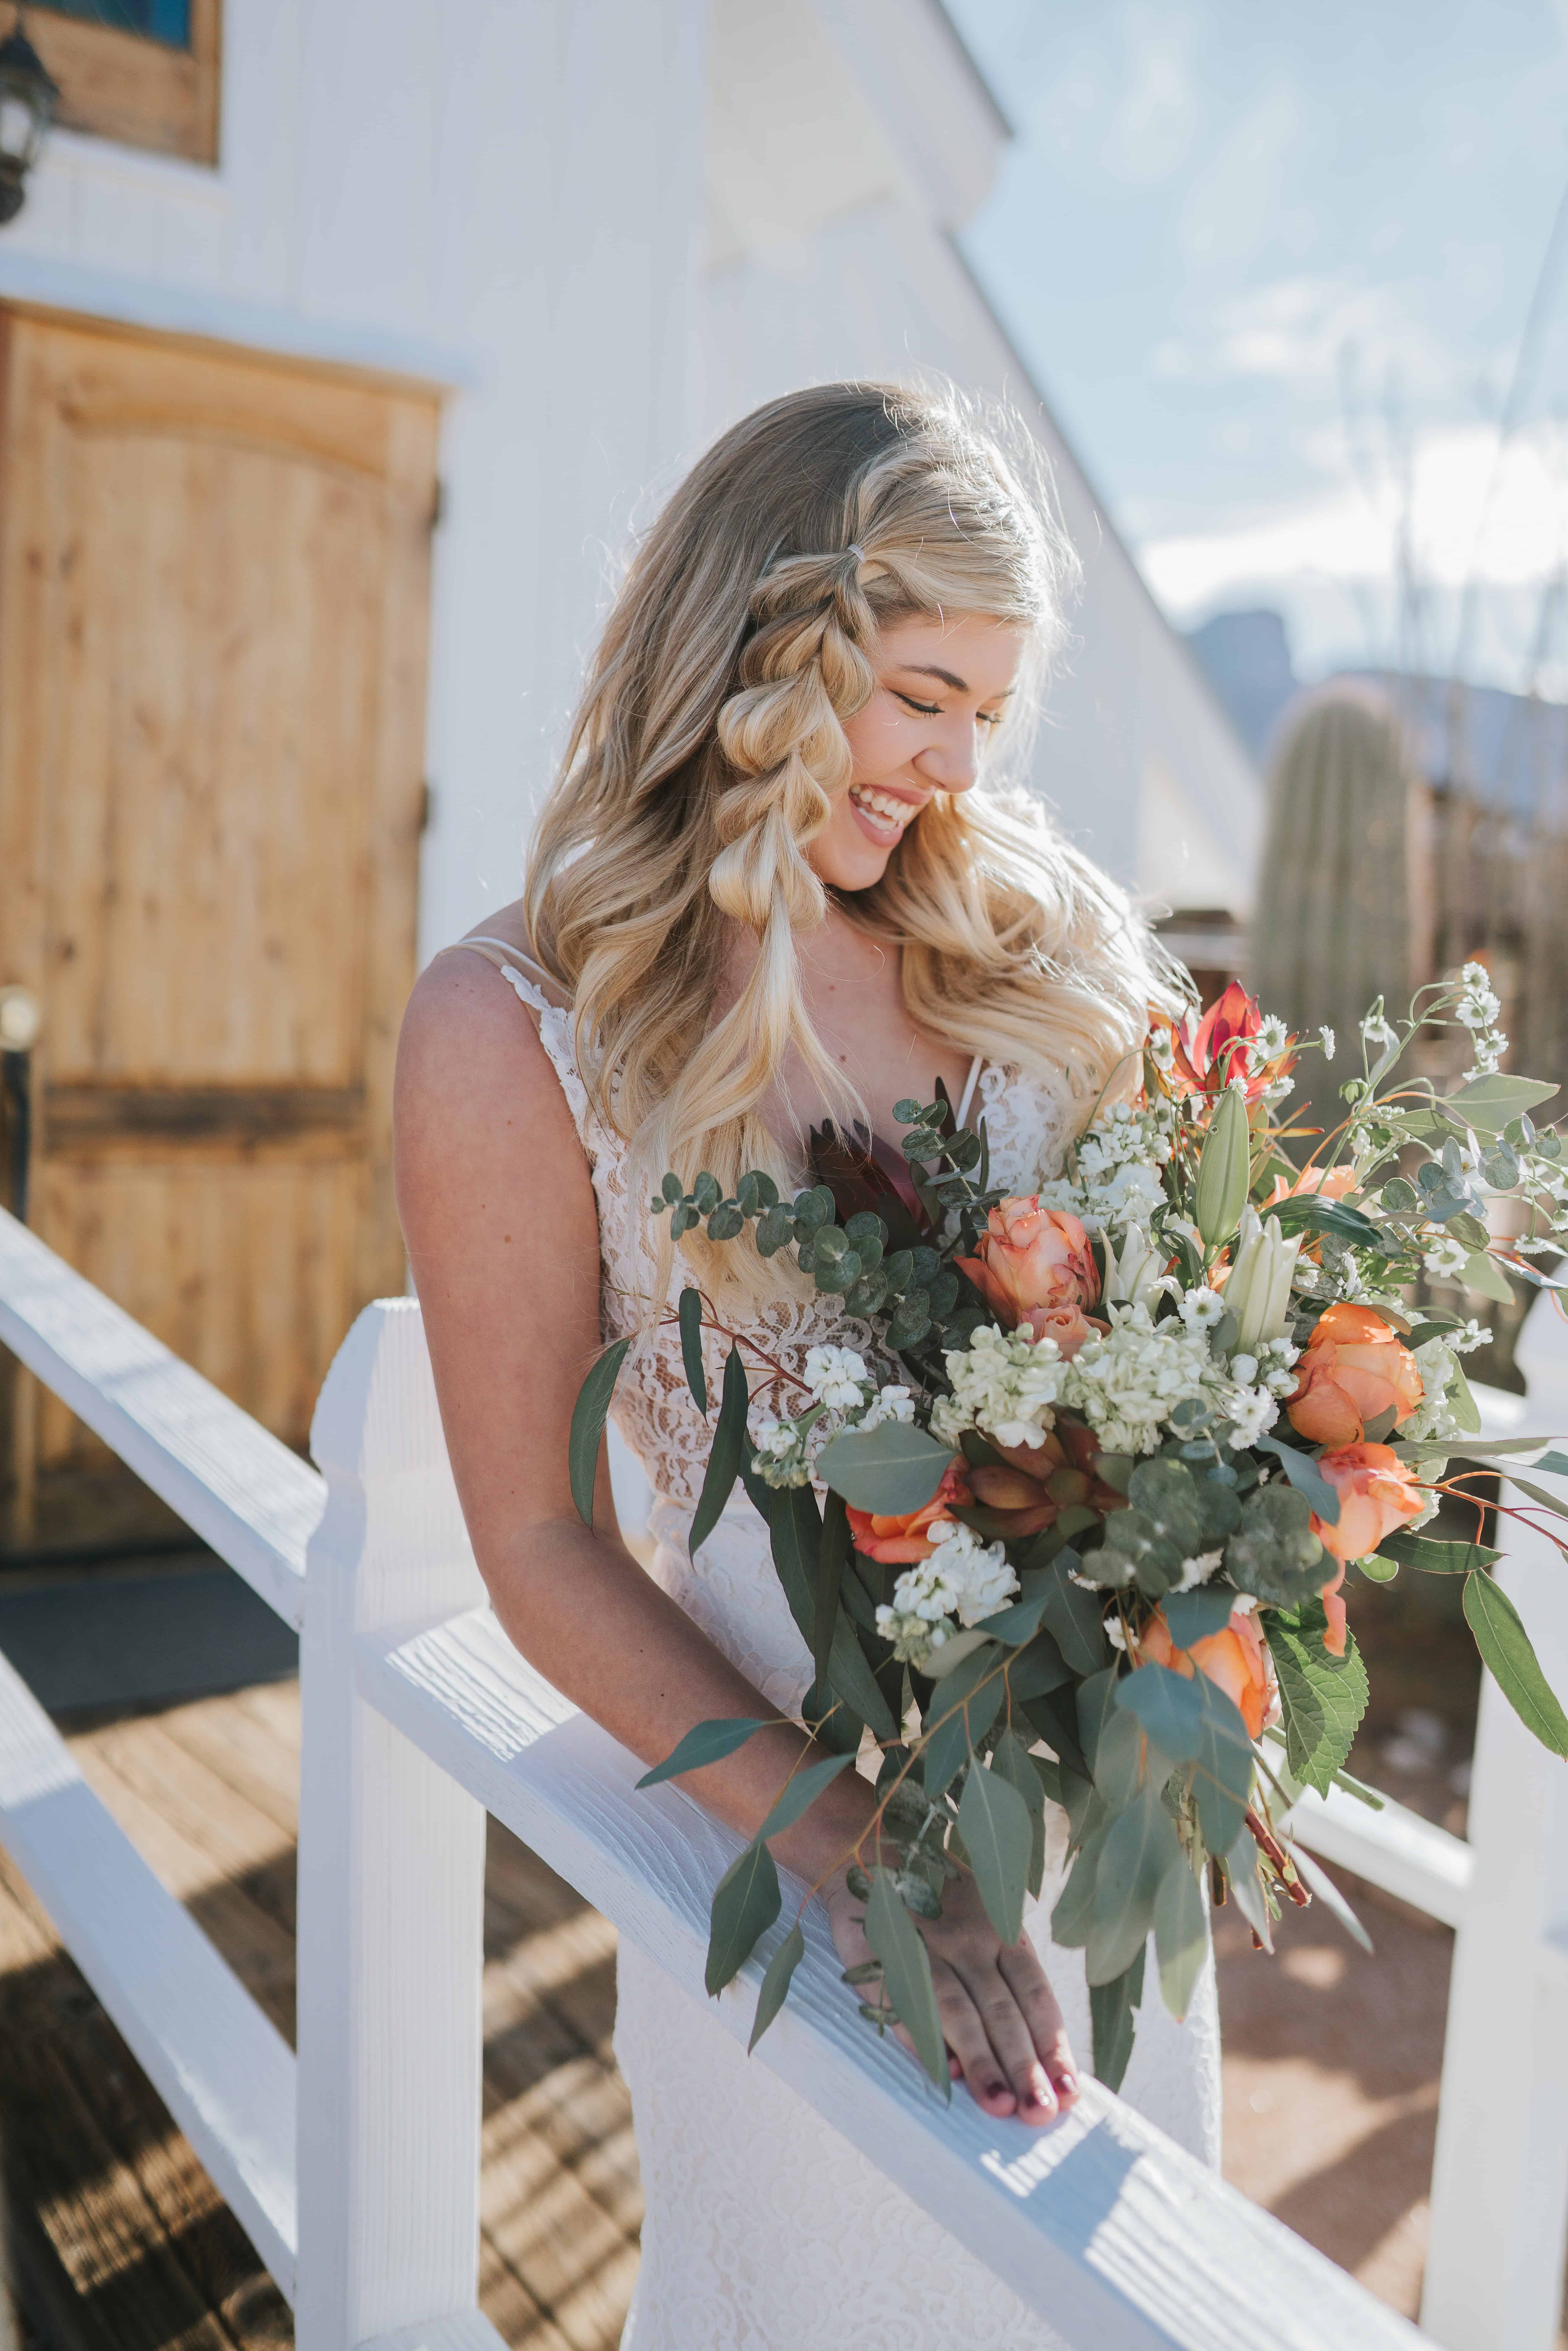 bride smiling down at her floral arrangement made up of colorful flowers